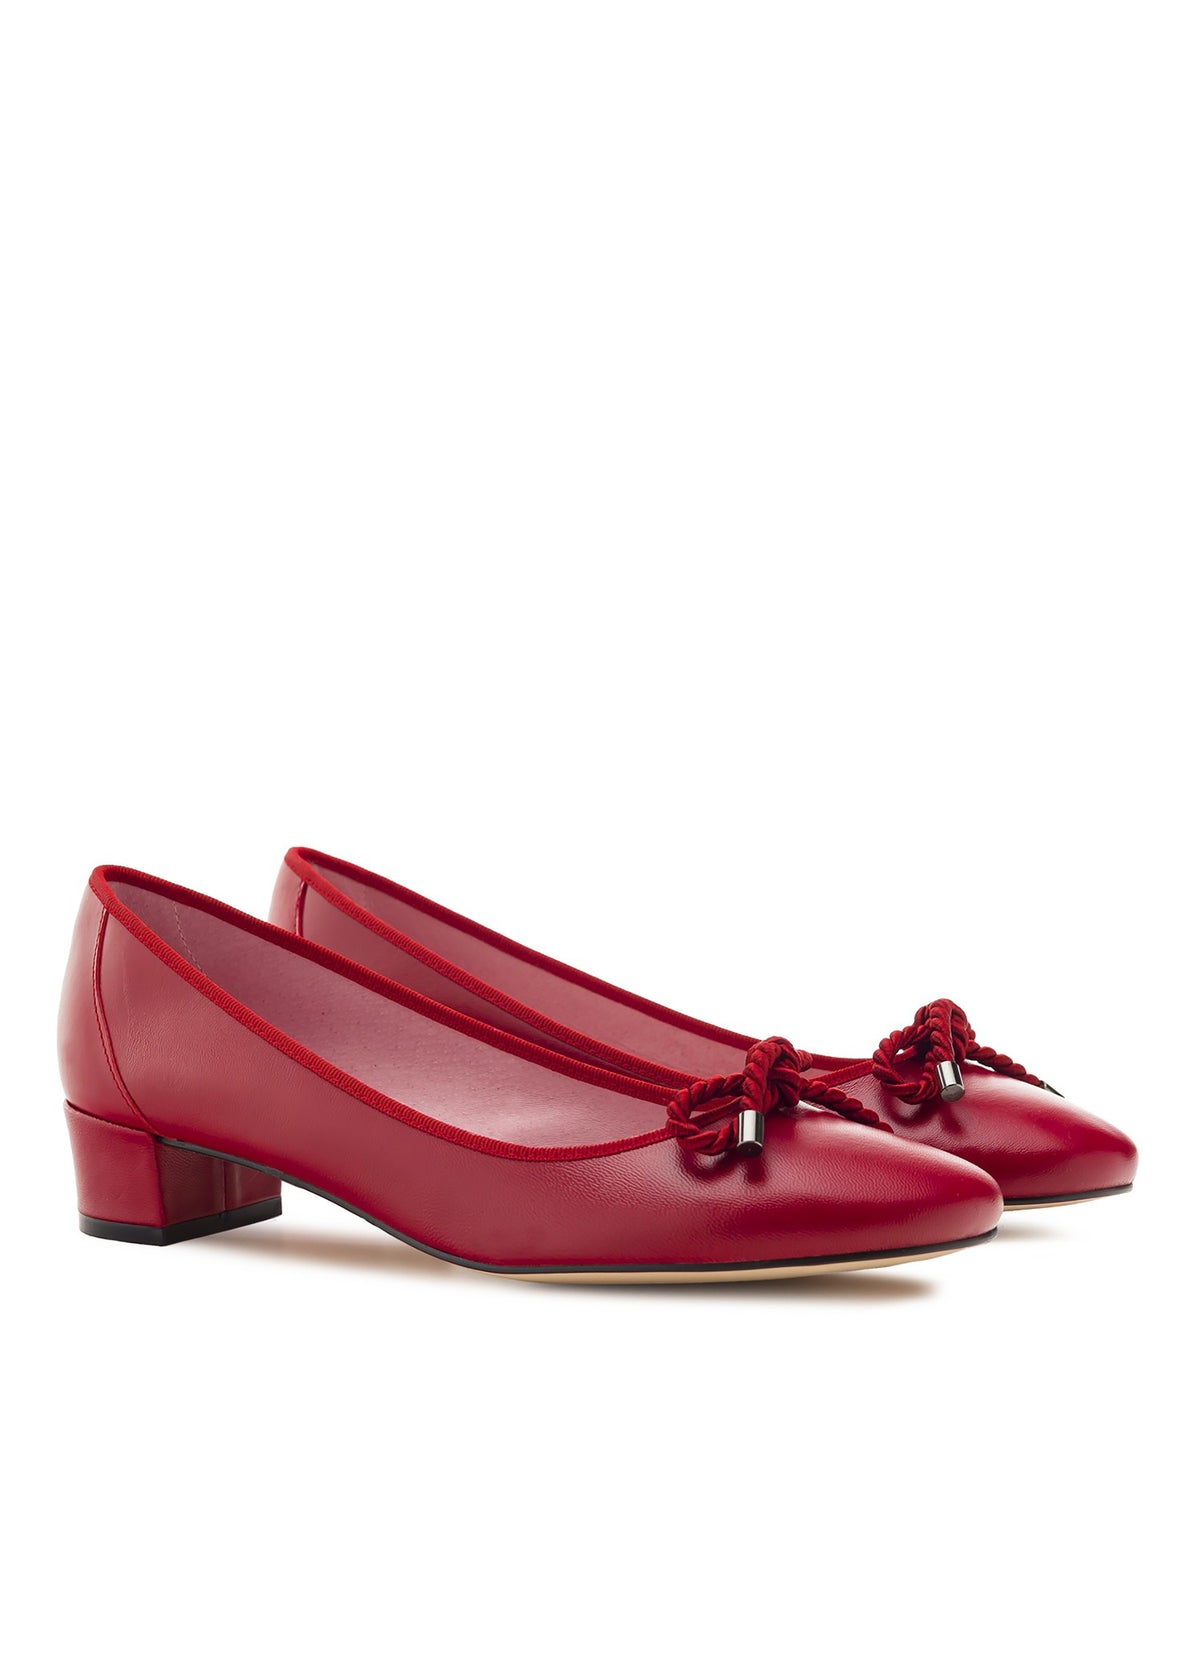 Low open-toe shoes with a studded heel - Lucia, red leather, bow decoration